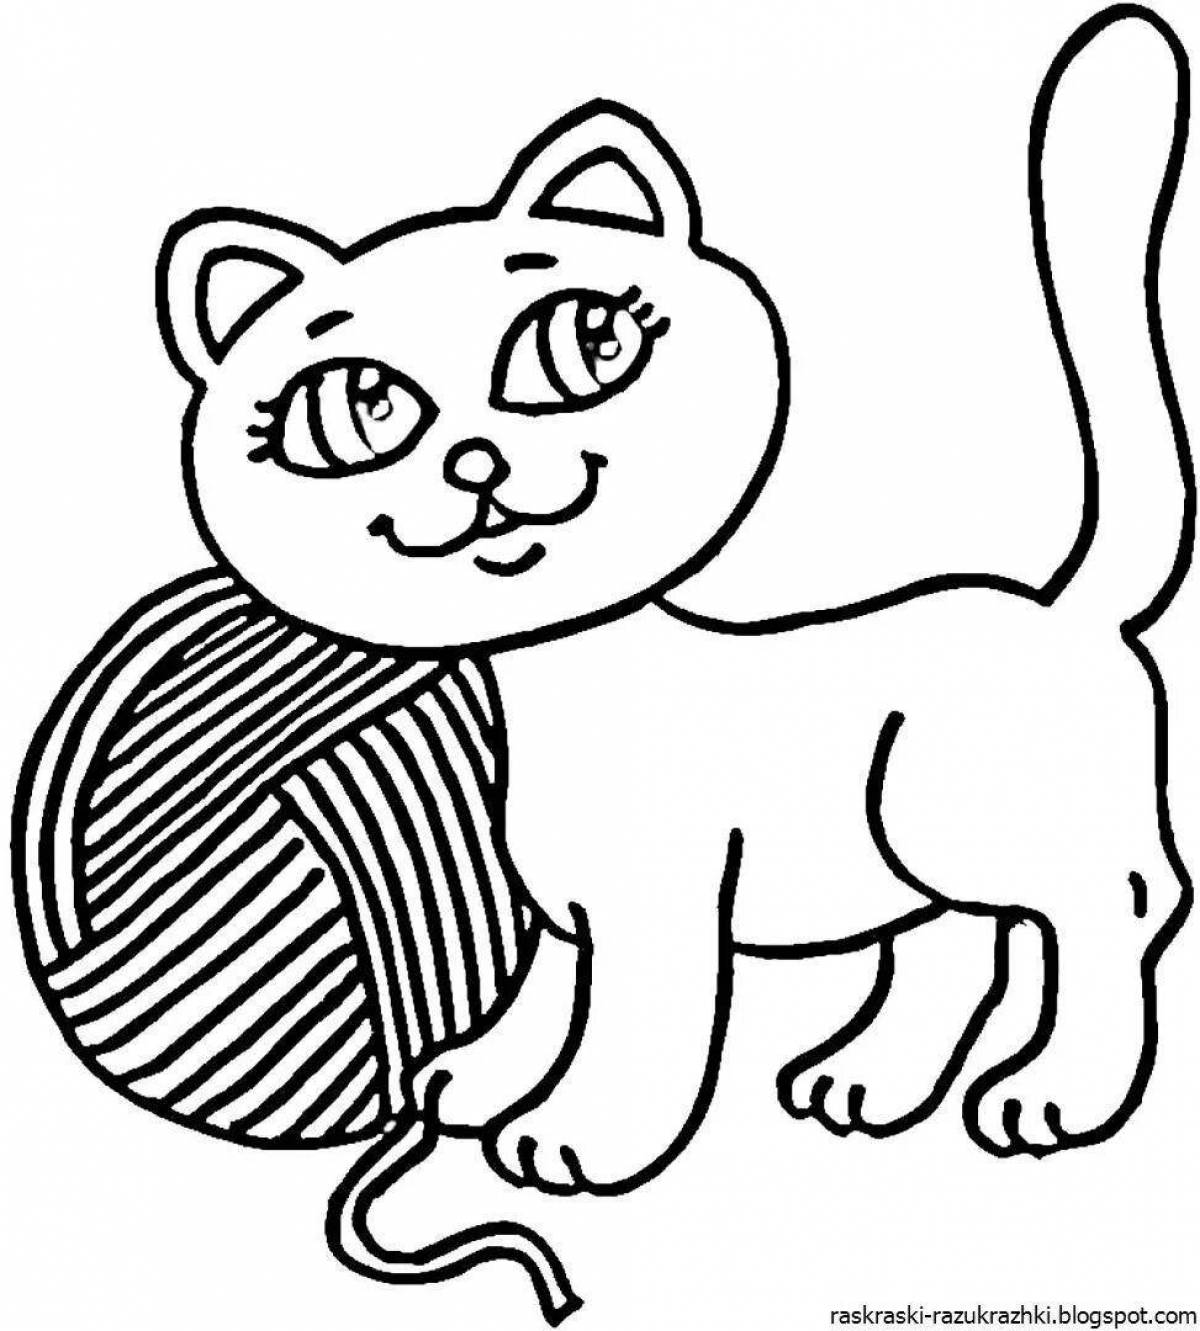 Crazy cat coloring book for kids